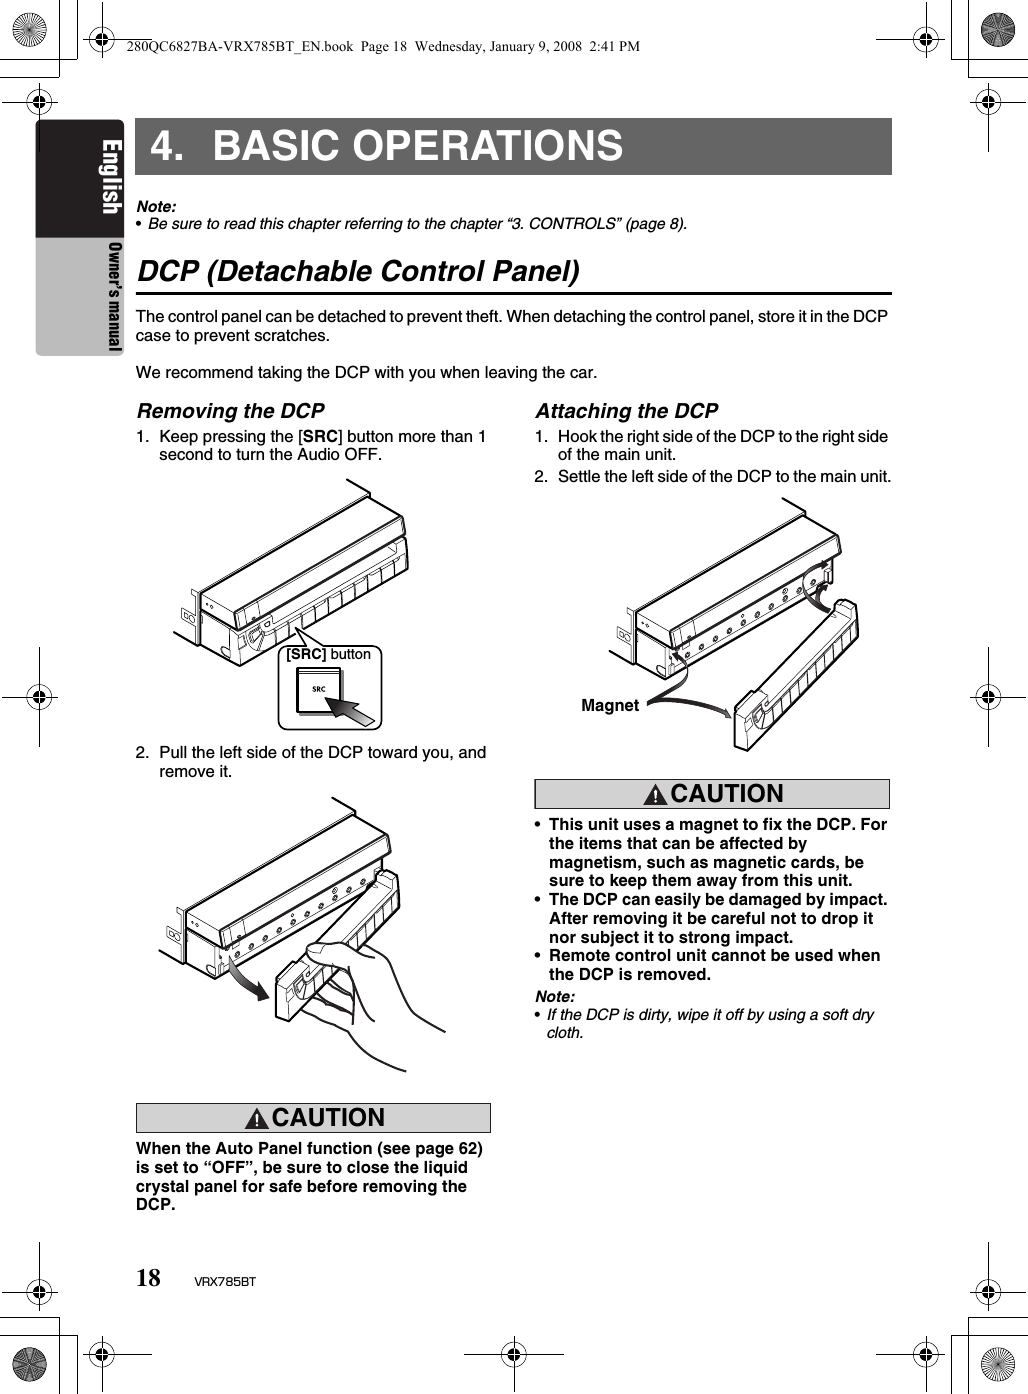 18 VRX785BTEnglish Owner’s manual4. BASIC OPERATIONSNote:•Be sure to read this chapter referring to the chapter “3. CONTROLS” (page 8).DCP (Detachable Control Panel)The control panel can be detached to prevent theft. When detaching the control panel, store it in the DCP case to prevent scratches.We recommend taking the DCP with you when leaving the car.Removing the DCP1. Keep pressing the [SRC] button more than 1 second to turn the Audio OFF.2. Pull the left side of the DCP toward you, and remove it.CAUTIONCAUTIONWhen the Auto Panel function (see page 62) is set to “OFF”, be sure to close the liquid crystal panel for safe before removing the DCP.Attaching the DCP1. Hook the right side of the DCP to the right side of the main unit.2. Settle the left side of the DCP to the main unit.CAUTIONCAUTION•This unit uses a magnet to fix the DCP. For the items that can be affected by magnetism, such as magnetic cards, be sure to keep them away from this unit.•The DCP can easily be damaged by impact. After removing it be careful not to drop it nor subject it to strong impact.•Remote control unit cannot be used when the DCP is removed.Note:•If the DCP is dirty, wipe it off by using a soft dry cloth.[SRC] buttonMagnet280QC6827BA-VRX785BT_EN.book  Page 18  Wednesday, January 9, 2008  2:41 PM